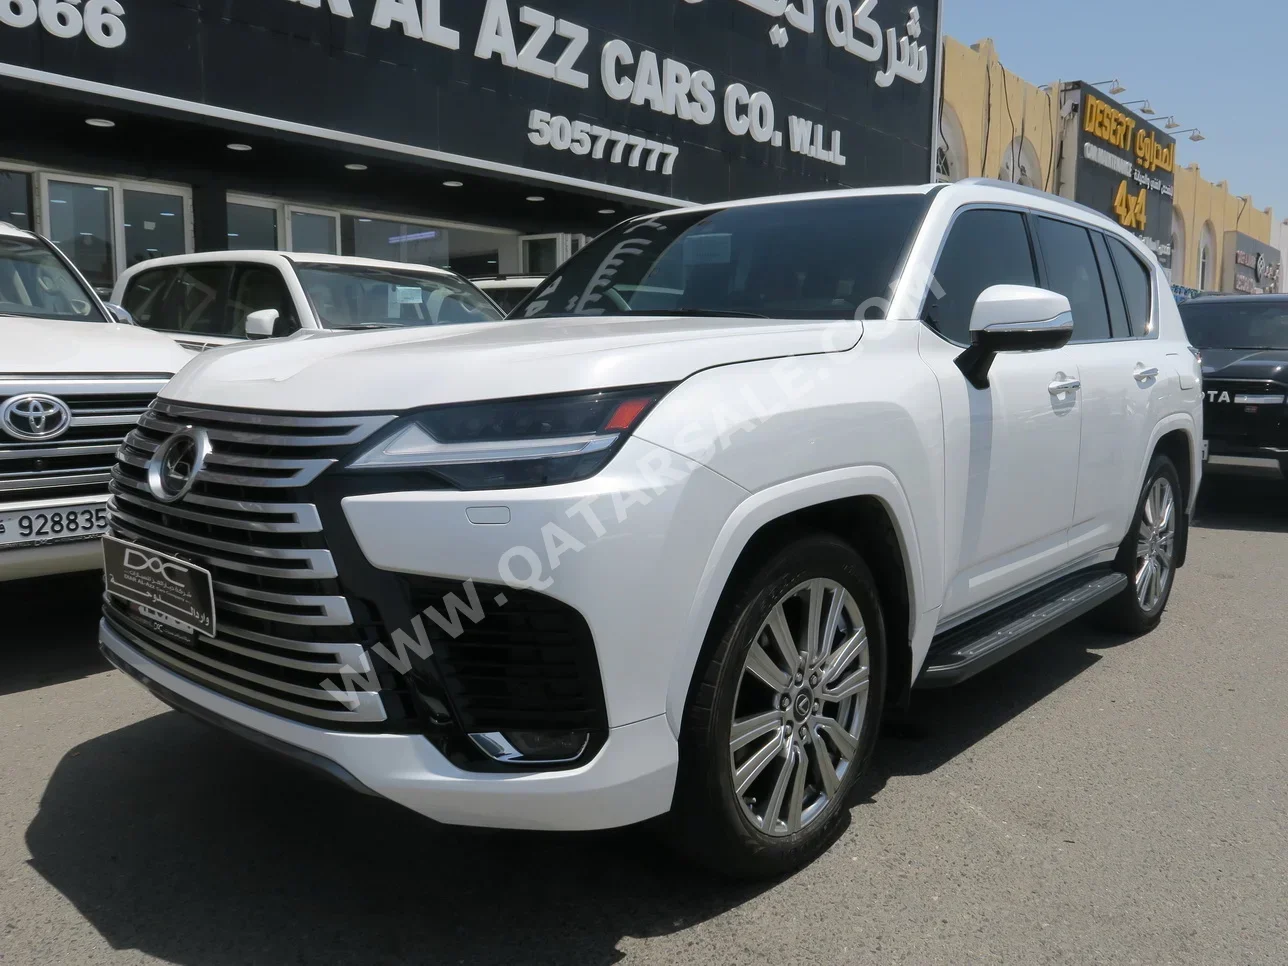 Lexus  LX  600 VIP  2023  Automatic  5,000 Km  6 Cylinder  Four Wheel Drive (4WD)  SUV  White  With Warranty